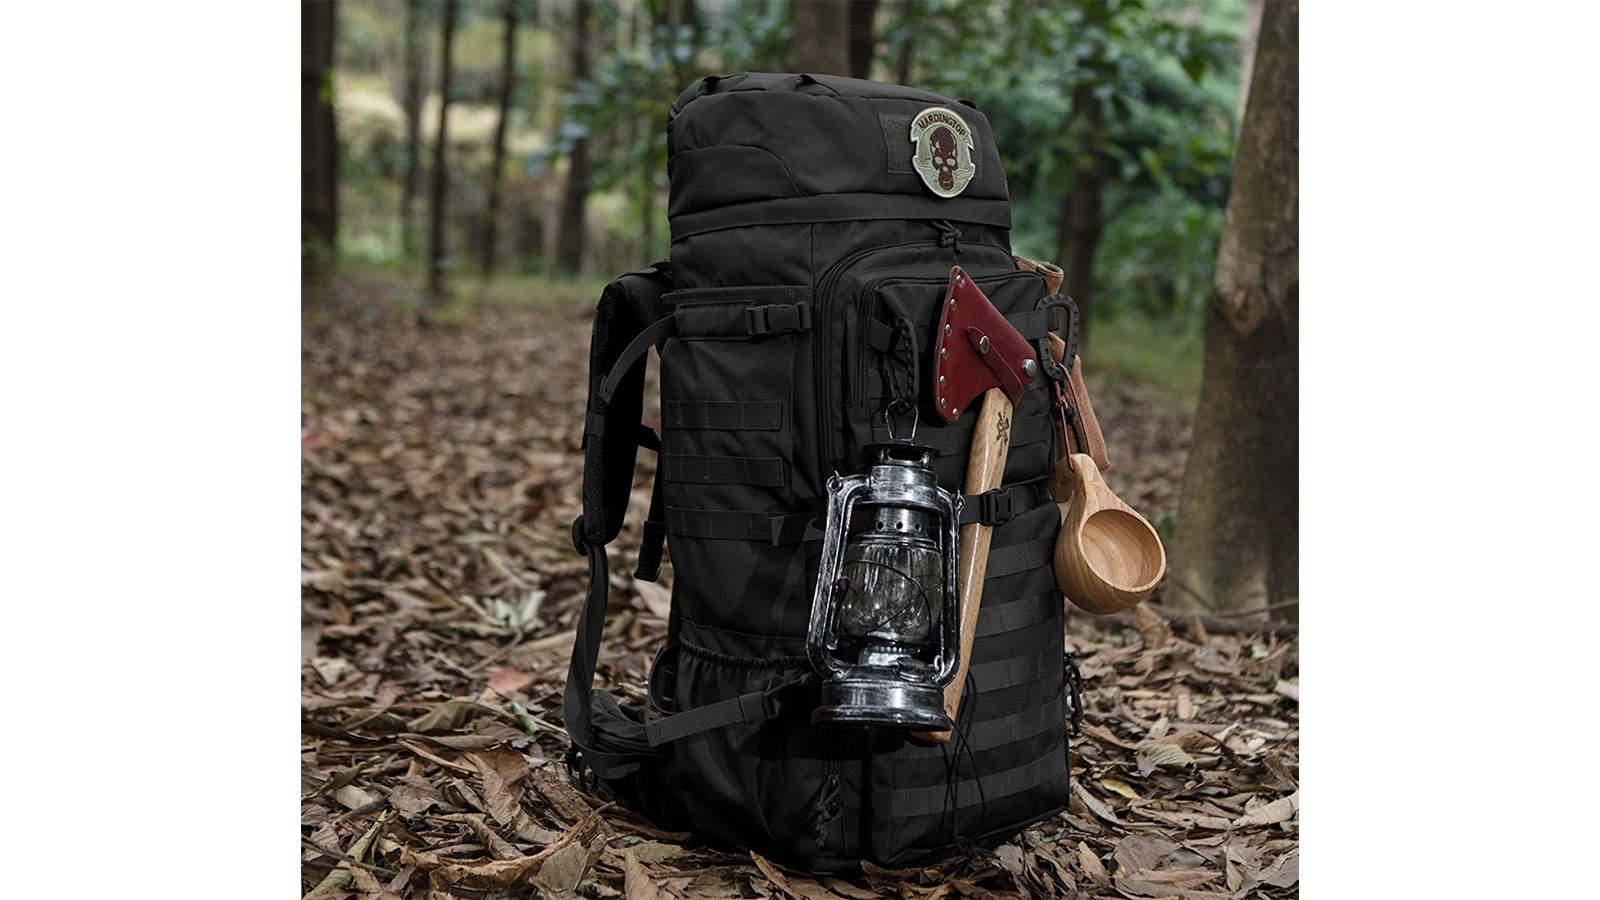 Mardingtop Molle Water Bottle Holder, Tactical Pouch Hydration Carrier